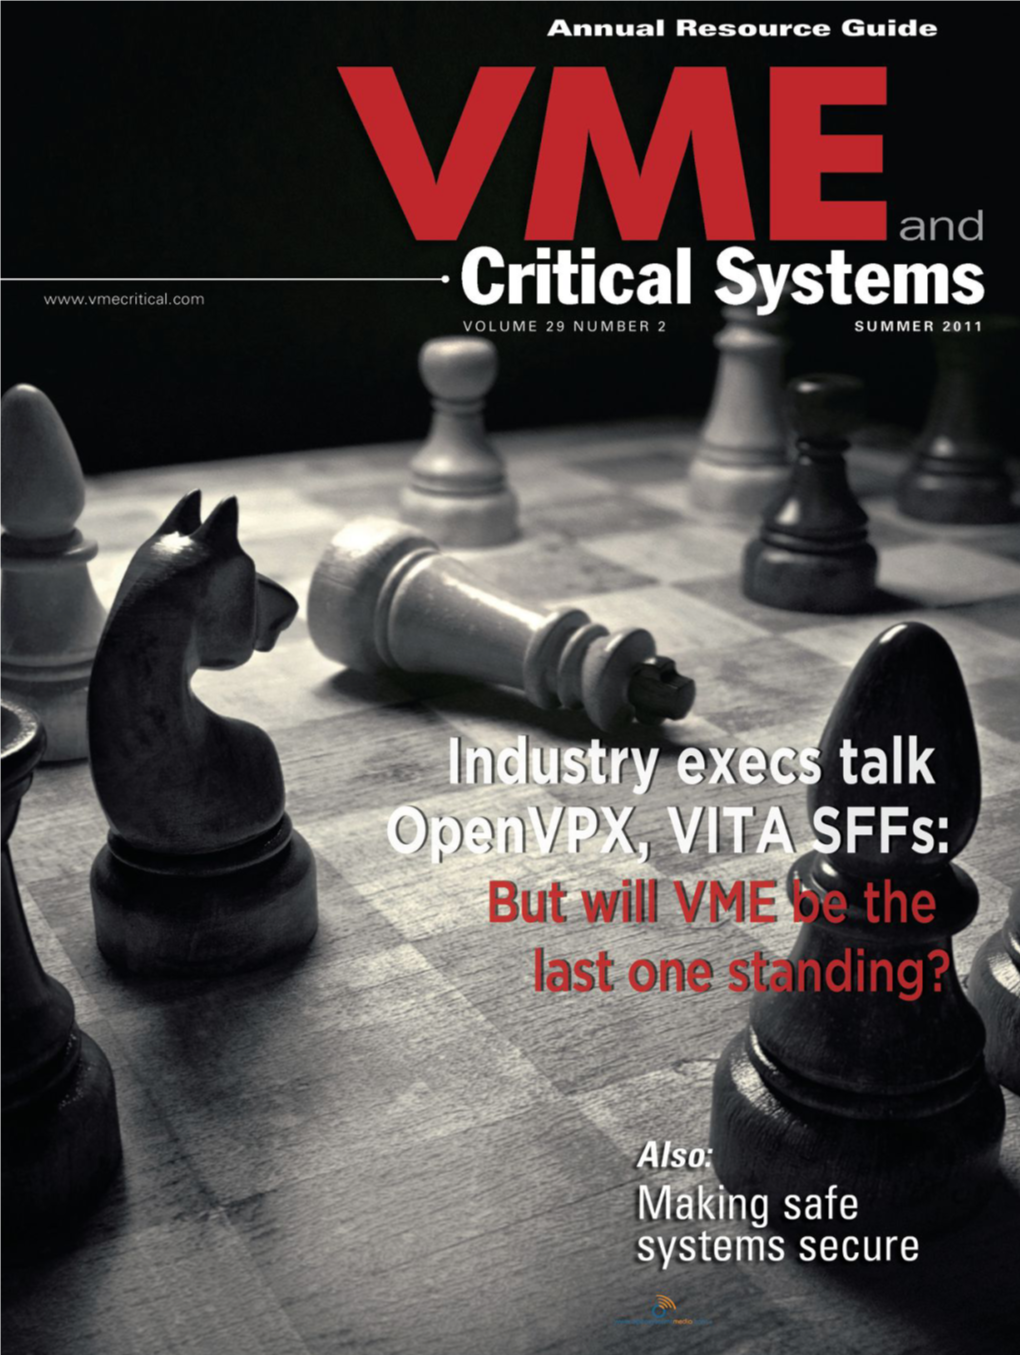 VME and Critical Systems Is Published Four Times a Year (Spring, Summer, Fall and Winter) by Opensystems Media, 16626 E